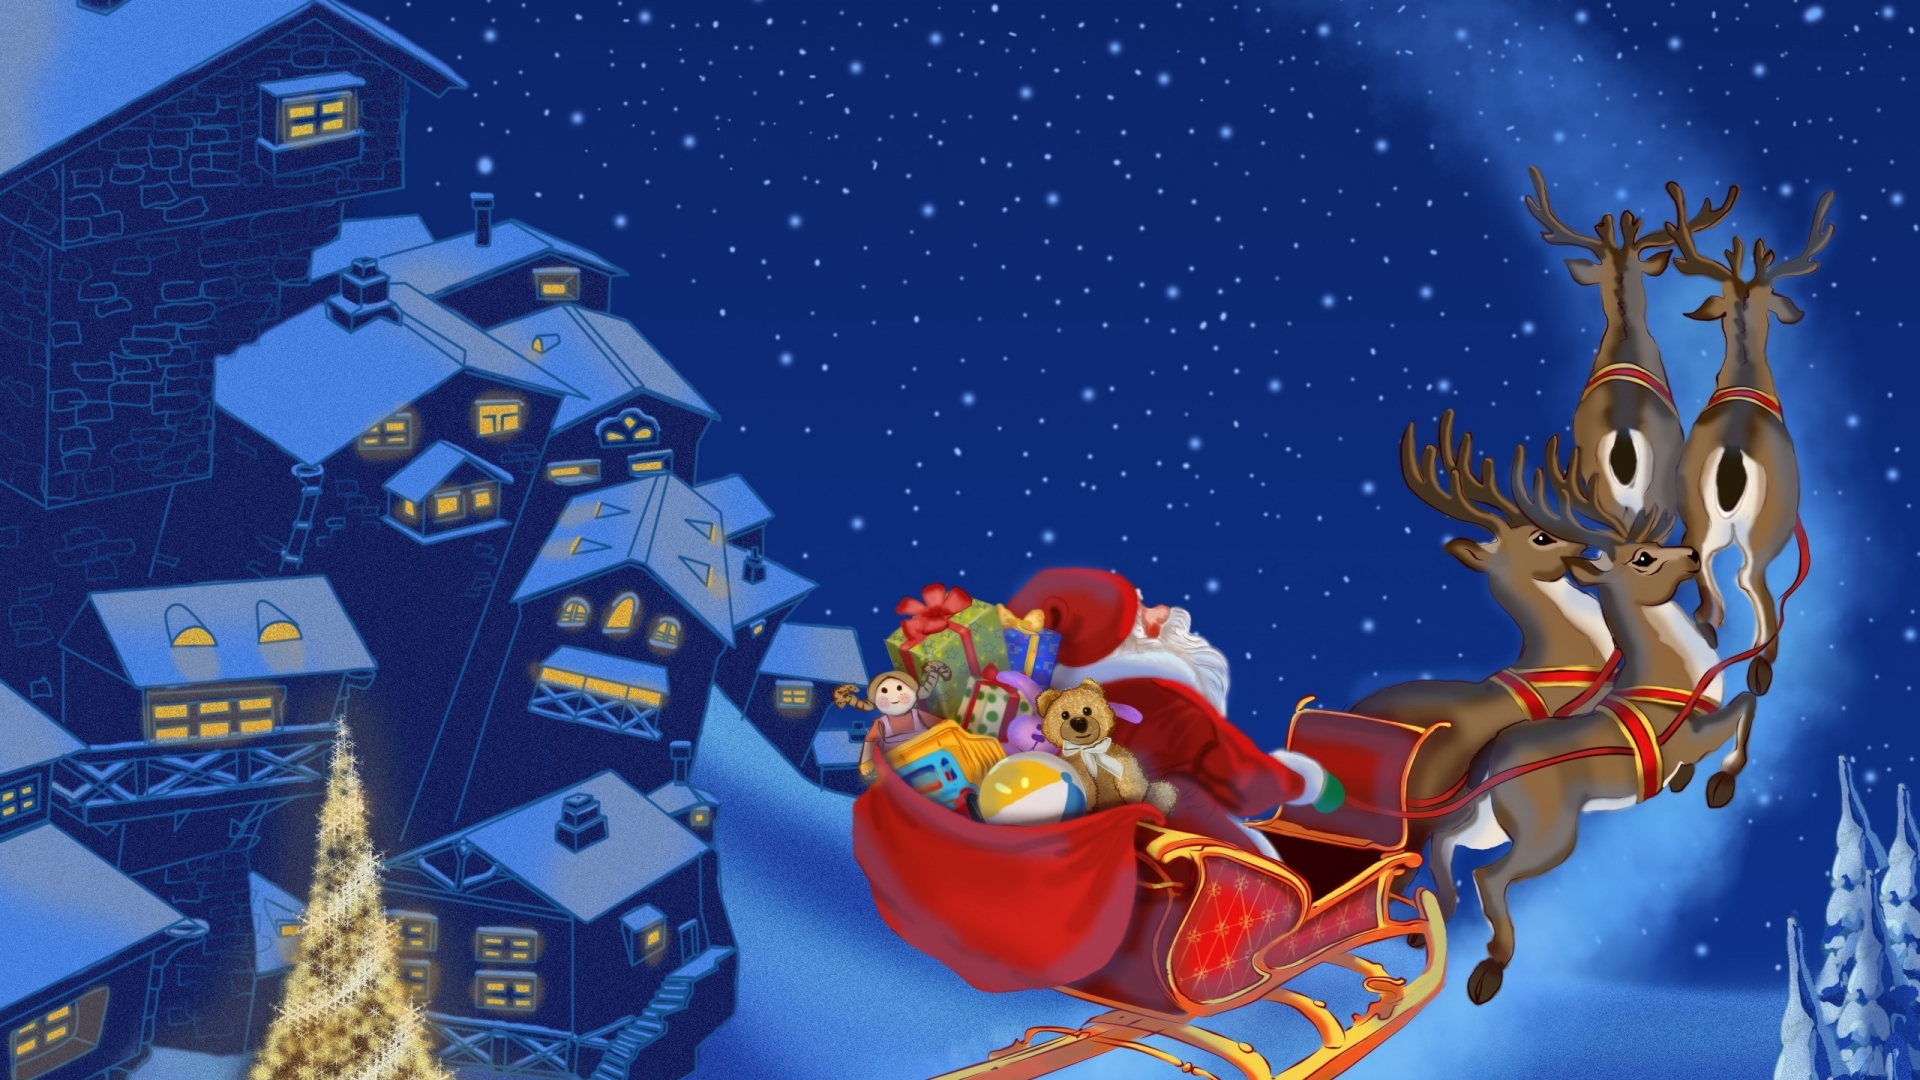 Santa Clause Flying for 1920 x 1080 HDTV 1080p resolution